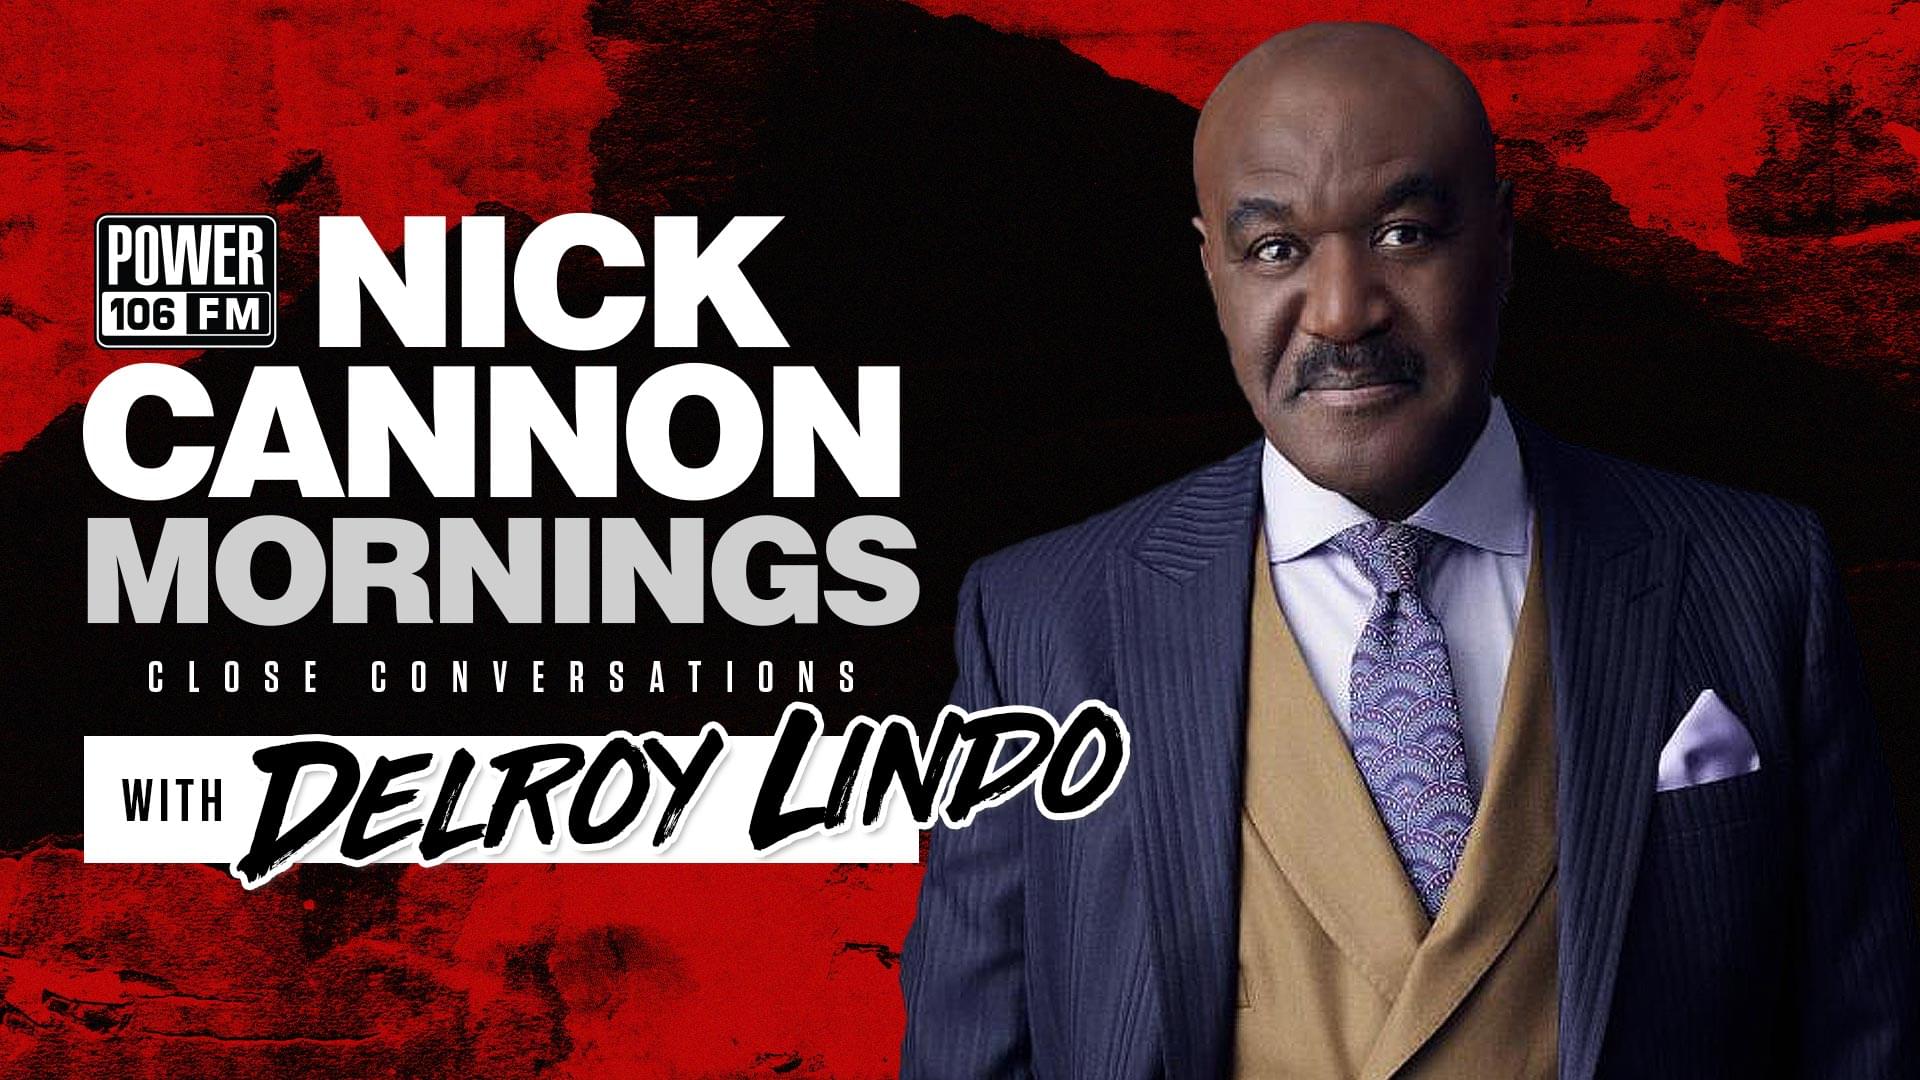 Delroy Lindo on Spike Lee, His New Film, ‘Da 5 Bloods’, Studying PTSD, Preparing For A Role, and His Journey of Characters.